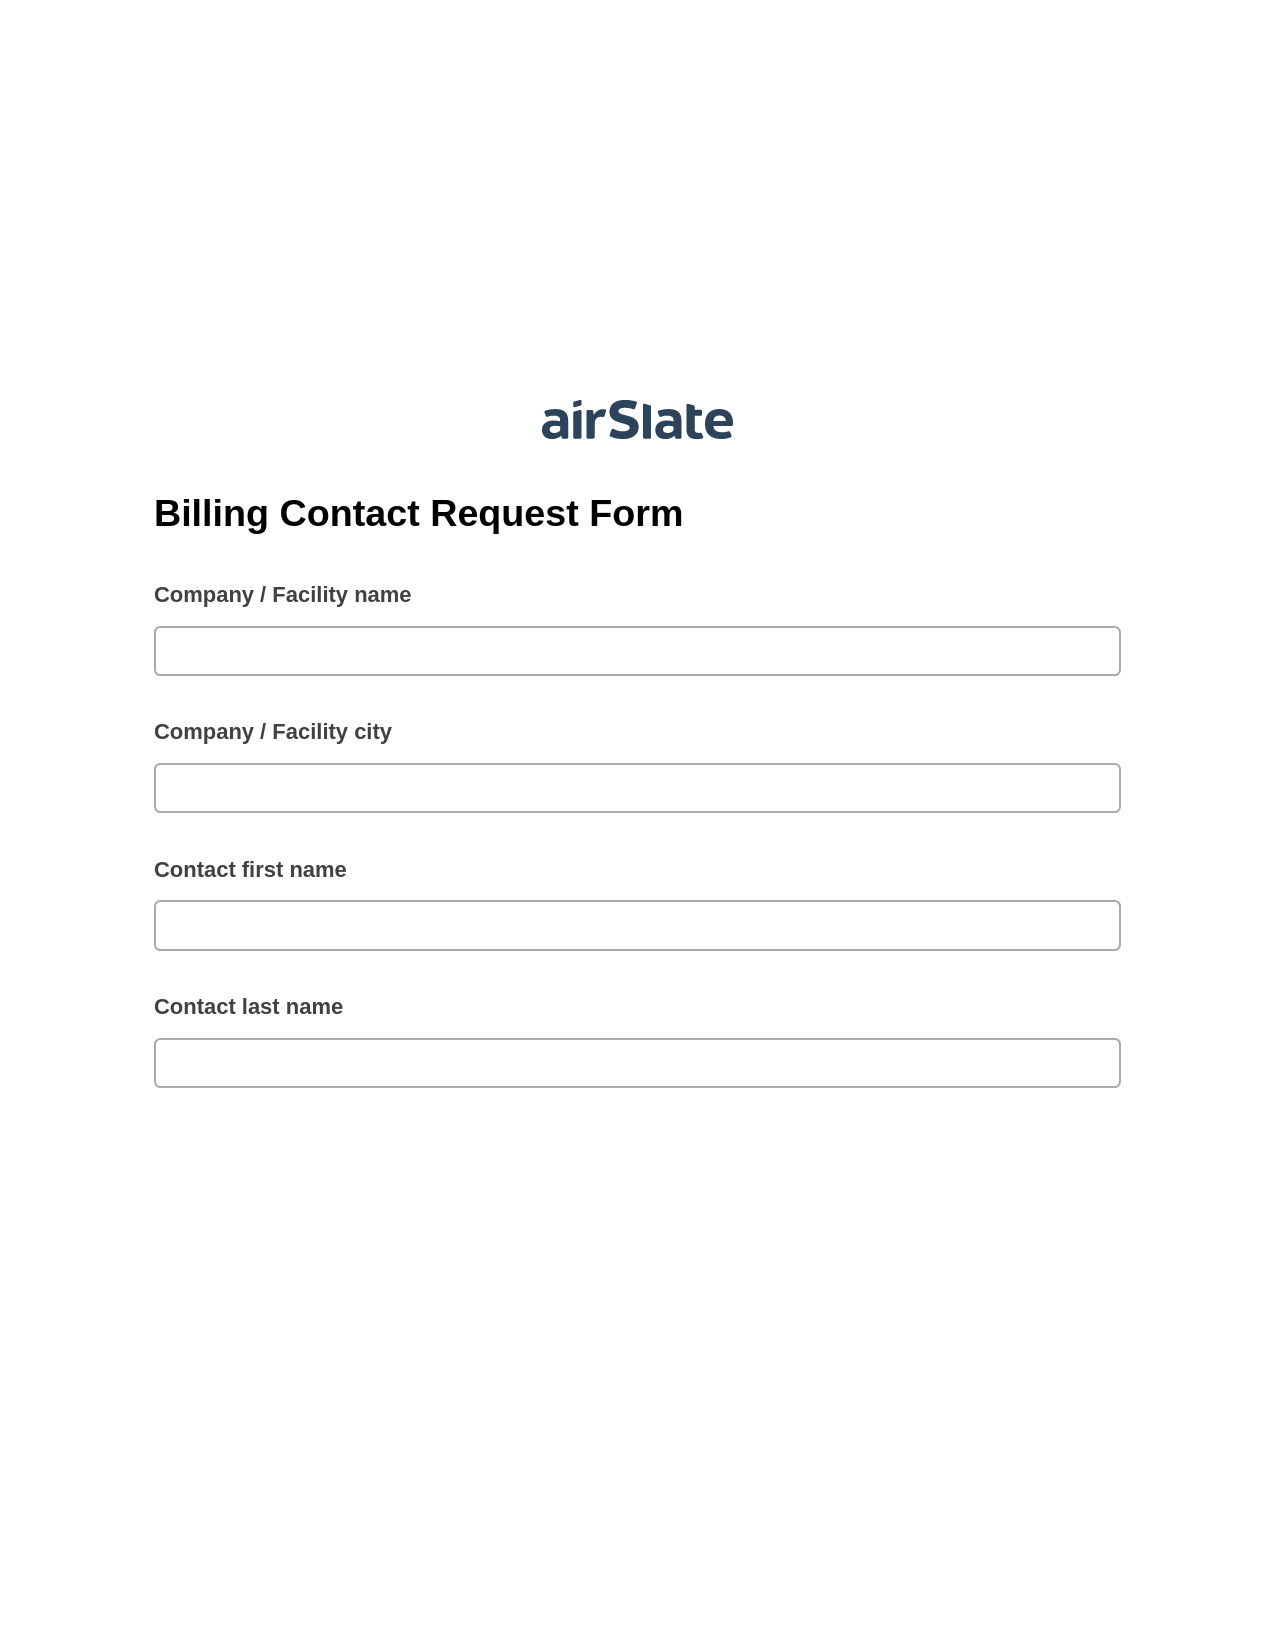 Multirole Billing Contact Request Form Pre-fill from Salesforce Records with SOQL Bot, Export to MS Dynamics 365 Bot, OneDrive Bot